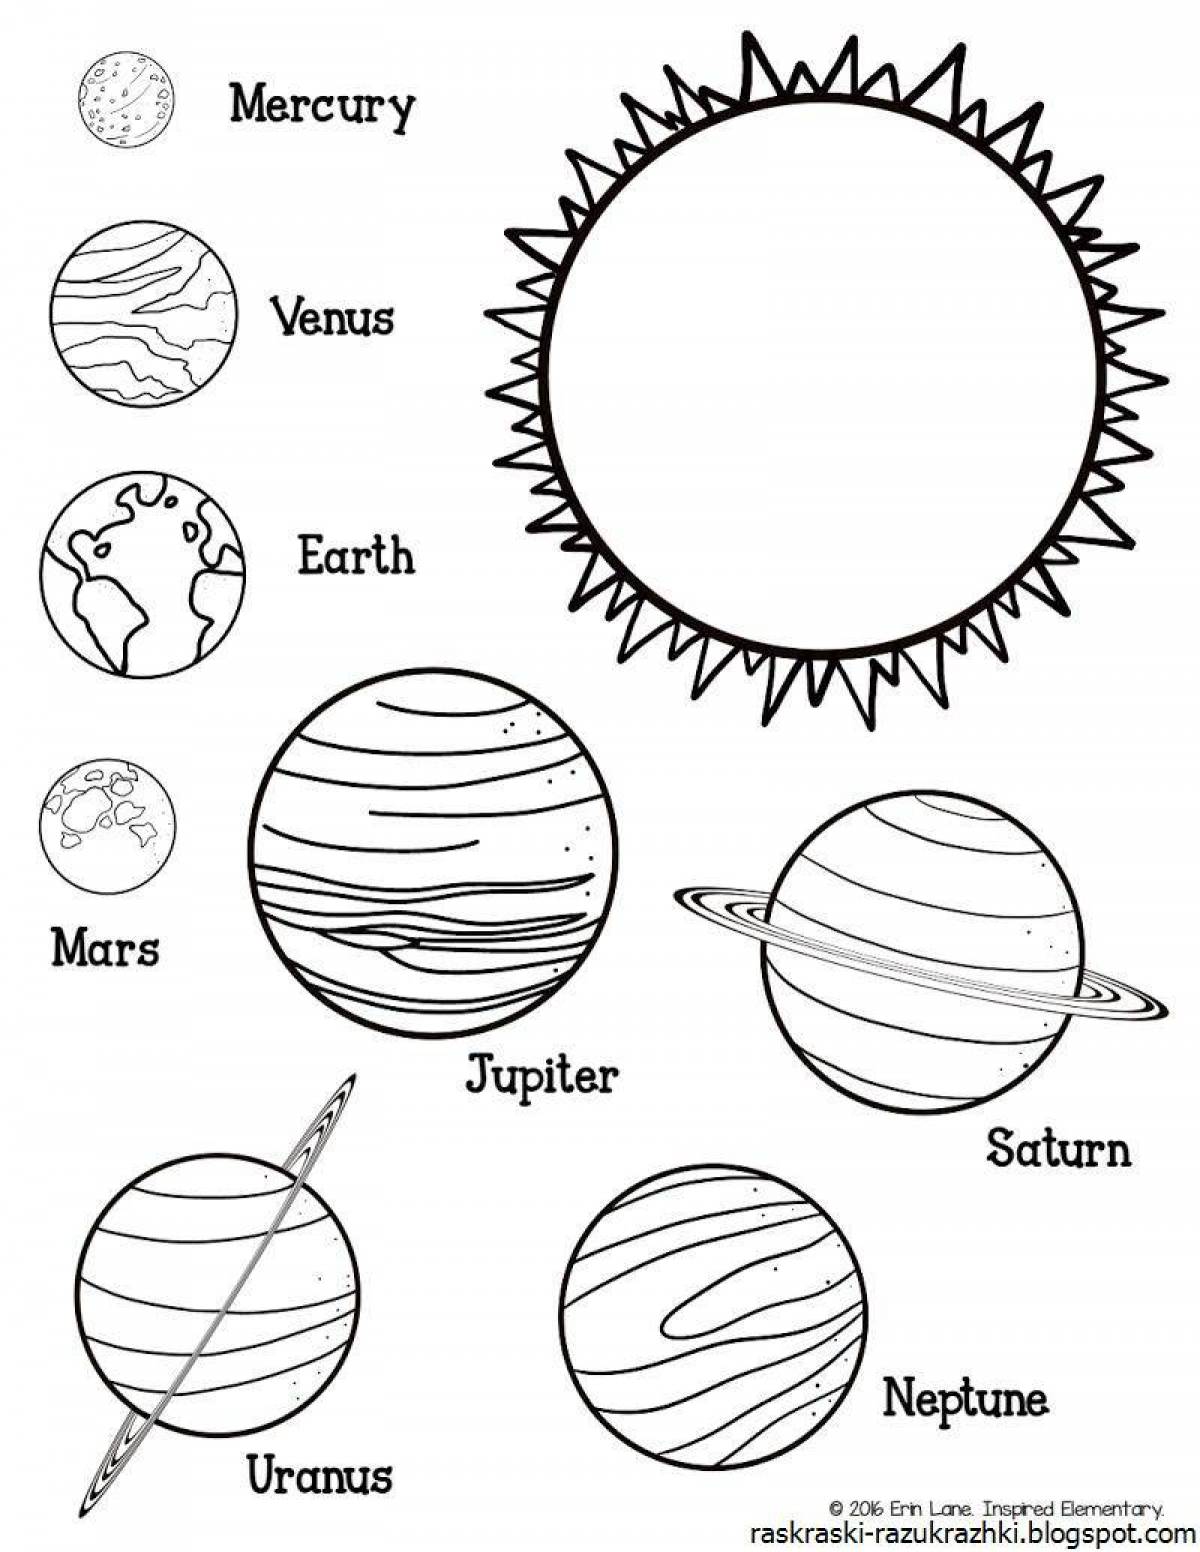 Planets of the solar system for kids #6